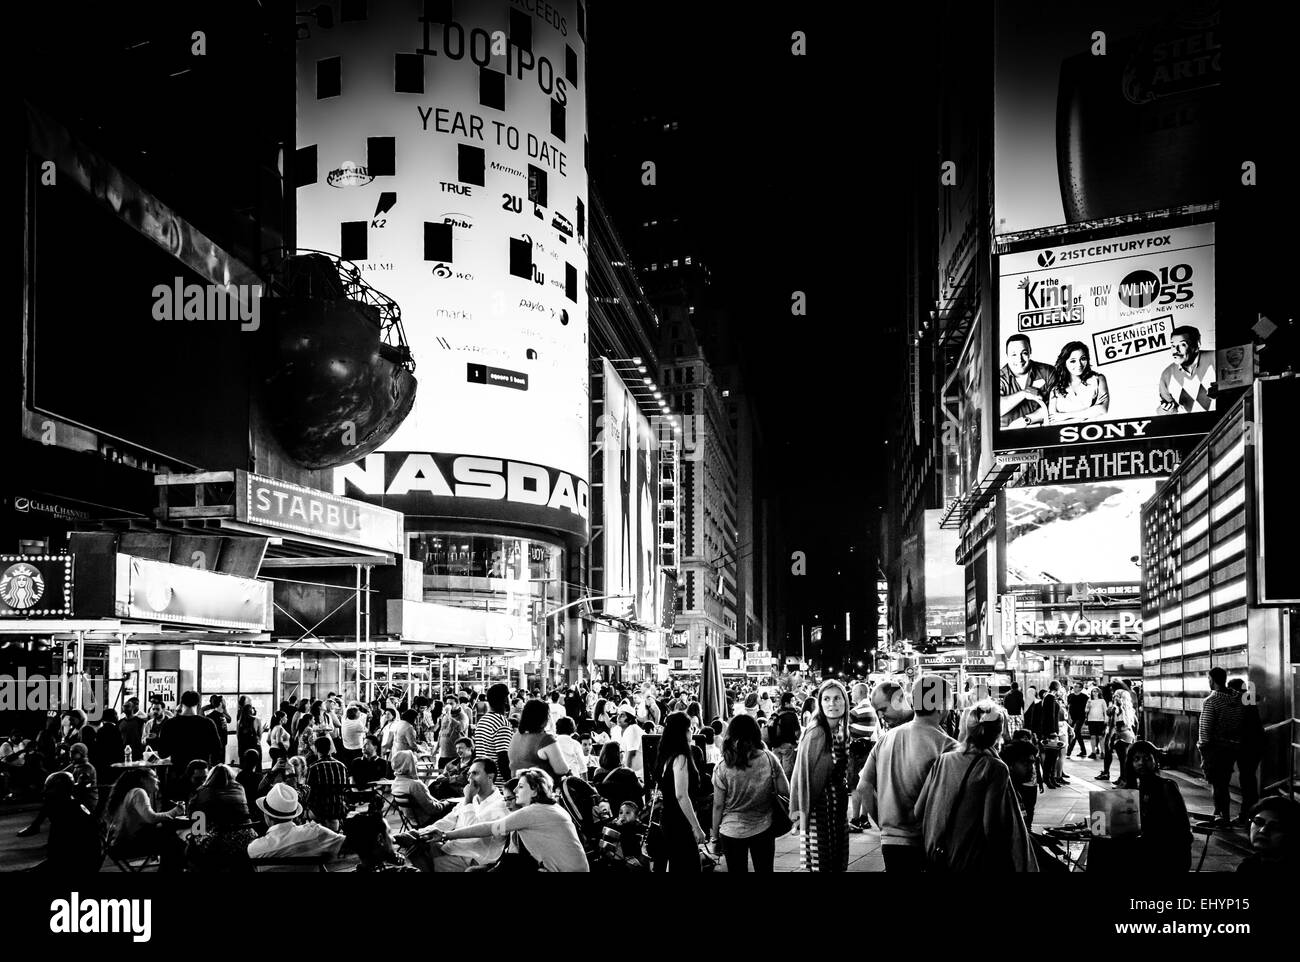 NEW YORK CITY - AUGUST 24, 2014:  Times Square at night in  Midtown Manhattan, New York on August 24, 2014. Times Square is a ma Stock Photo